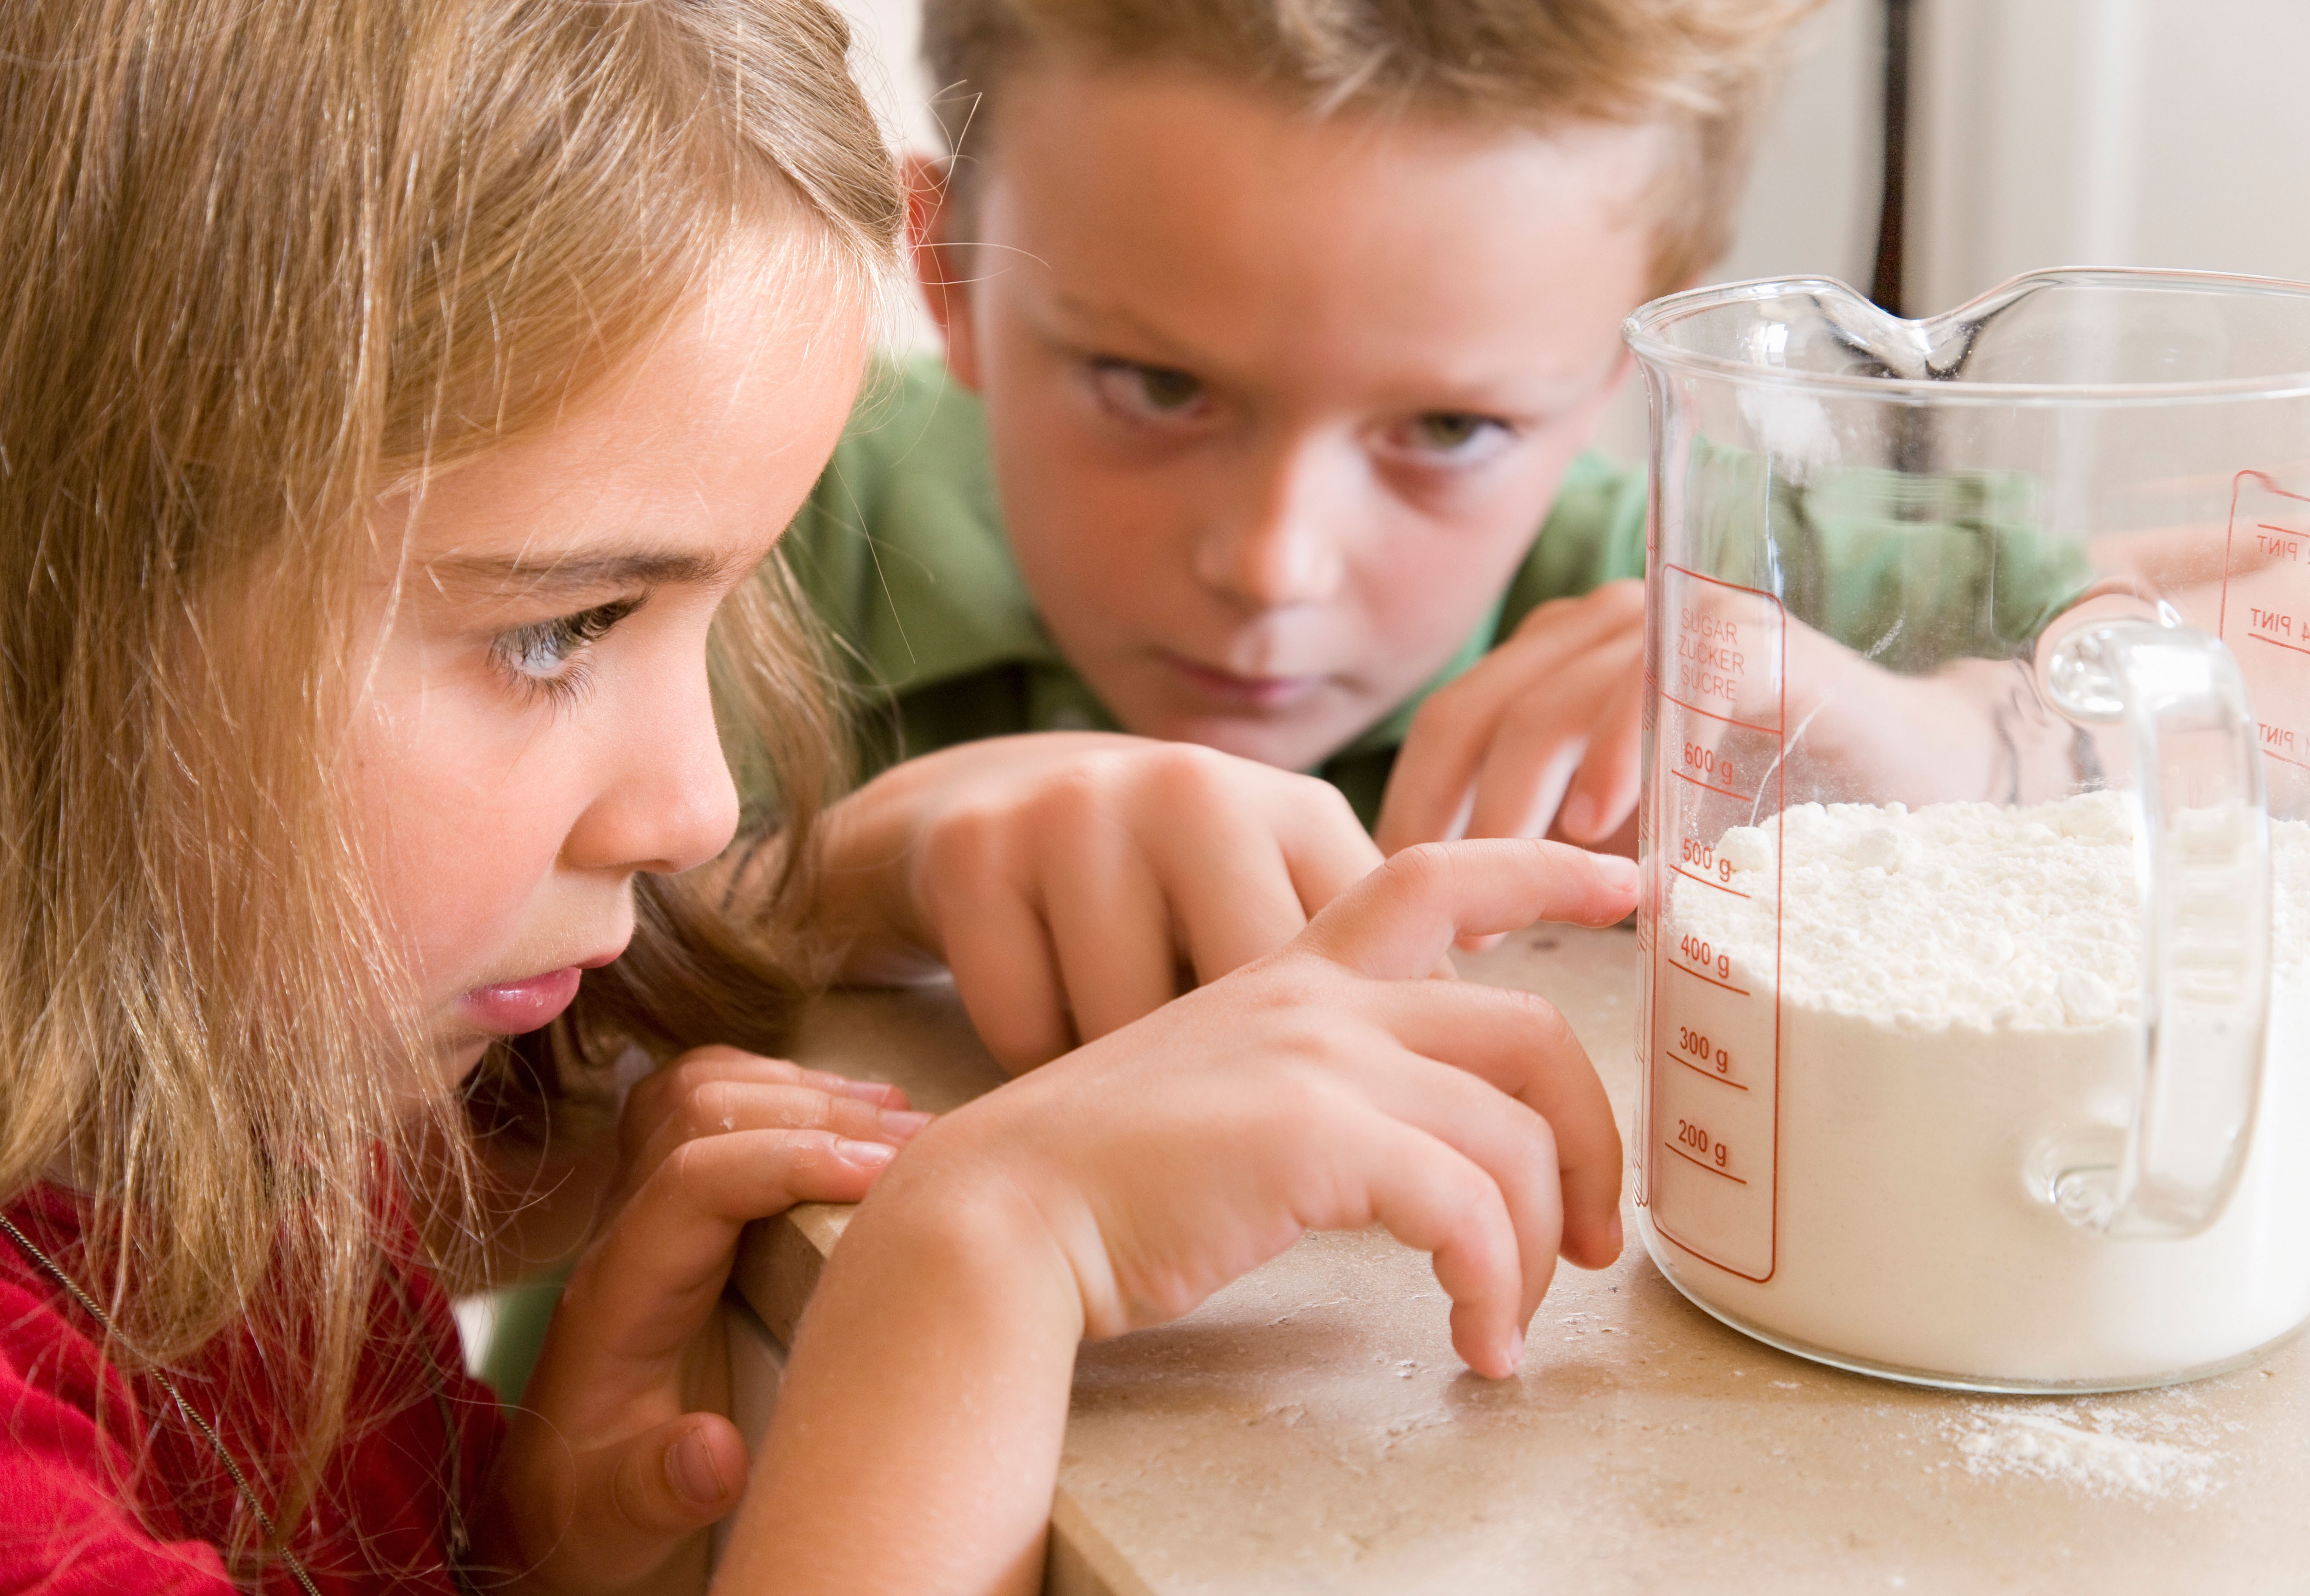 Find creative ways to keep maths in a child’s mind over the summer holiday, such as measuring flour for baking. Photo: Alamy